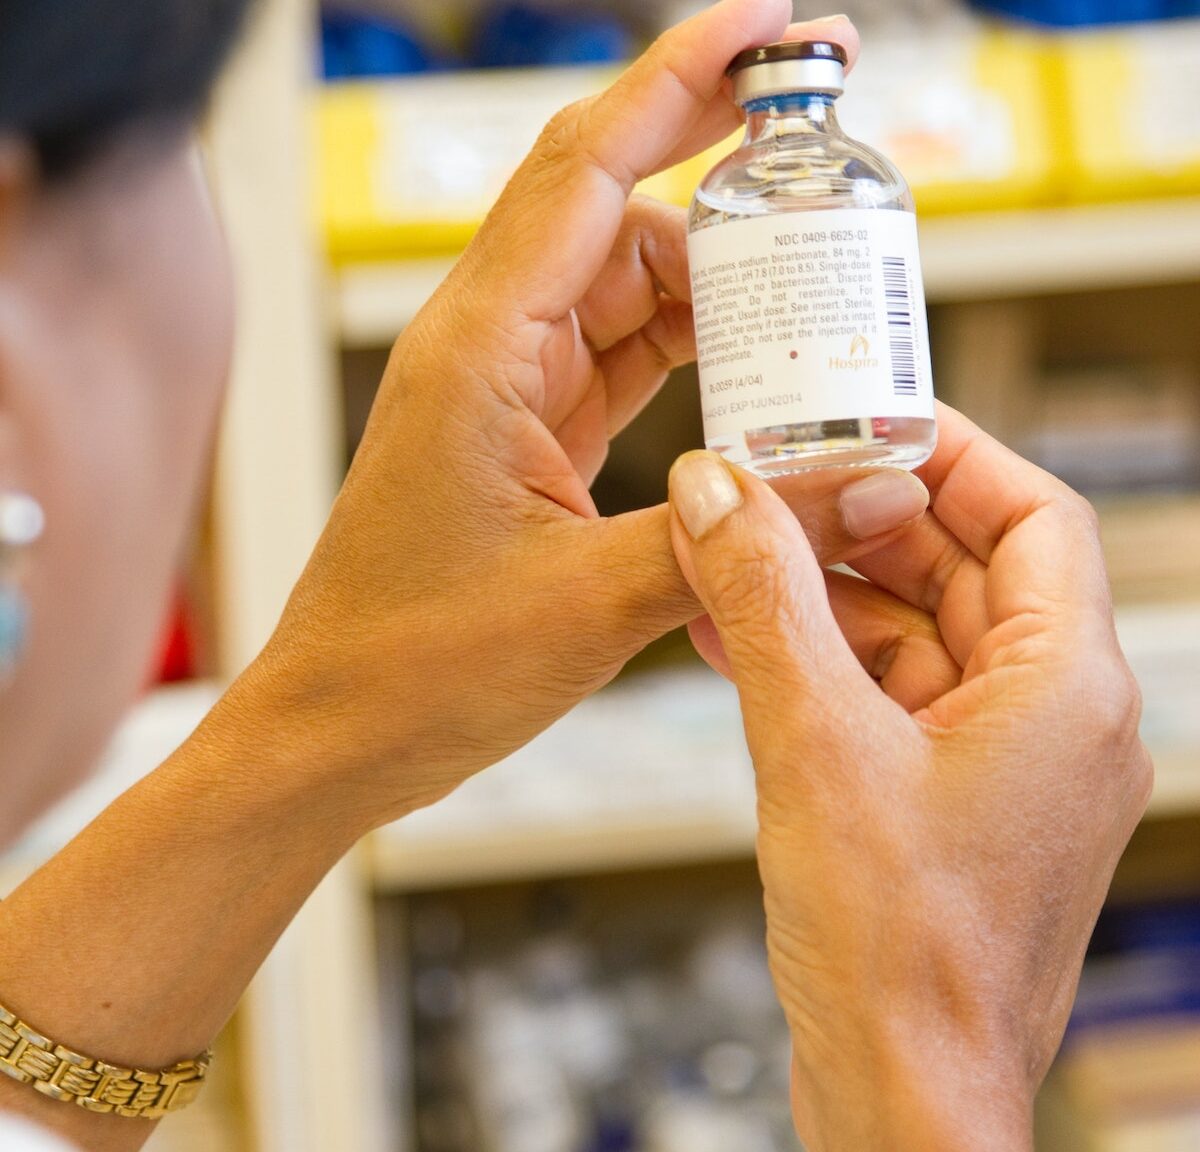 A female pharmacist is examining a vial in a pharmacy.